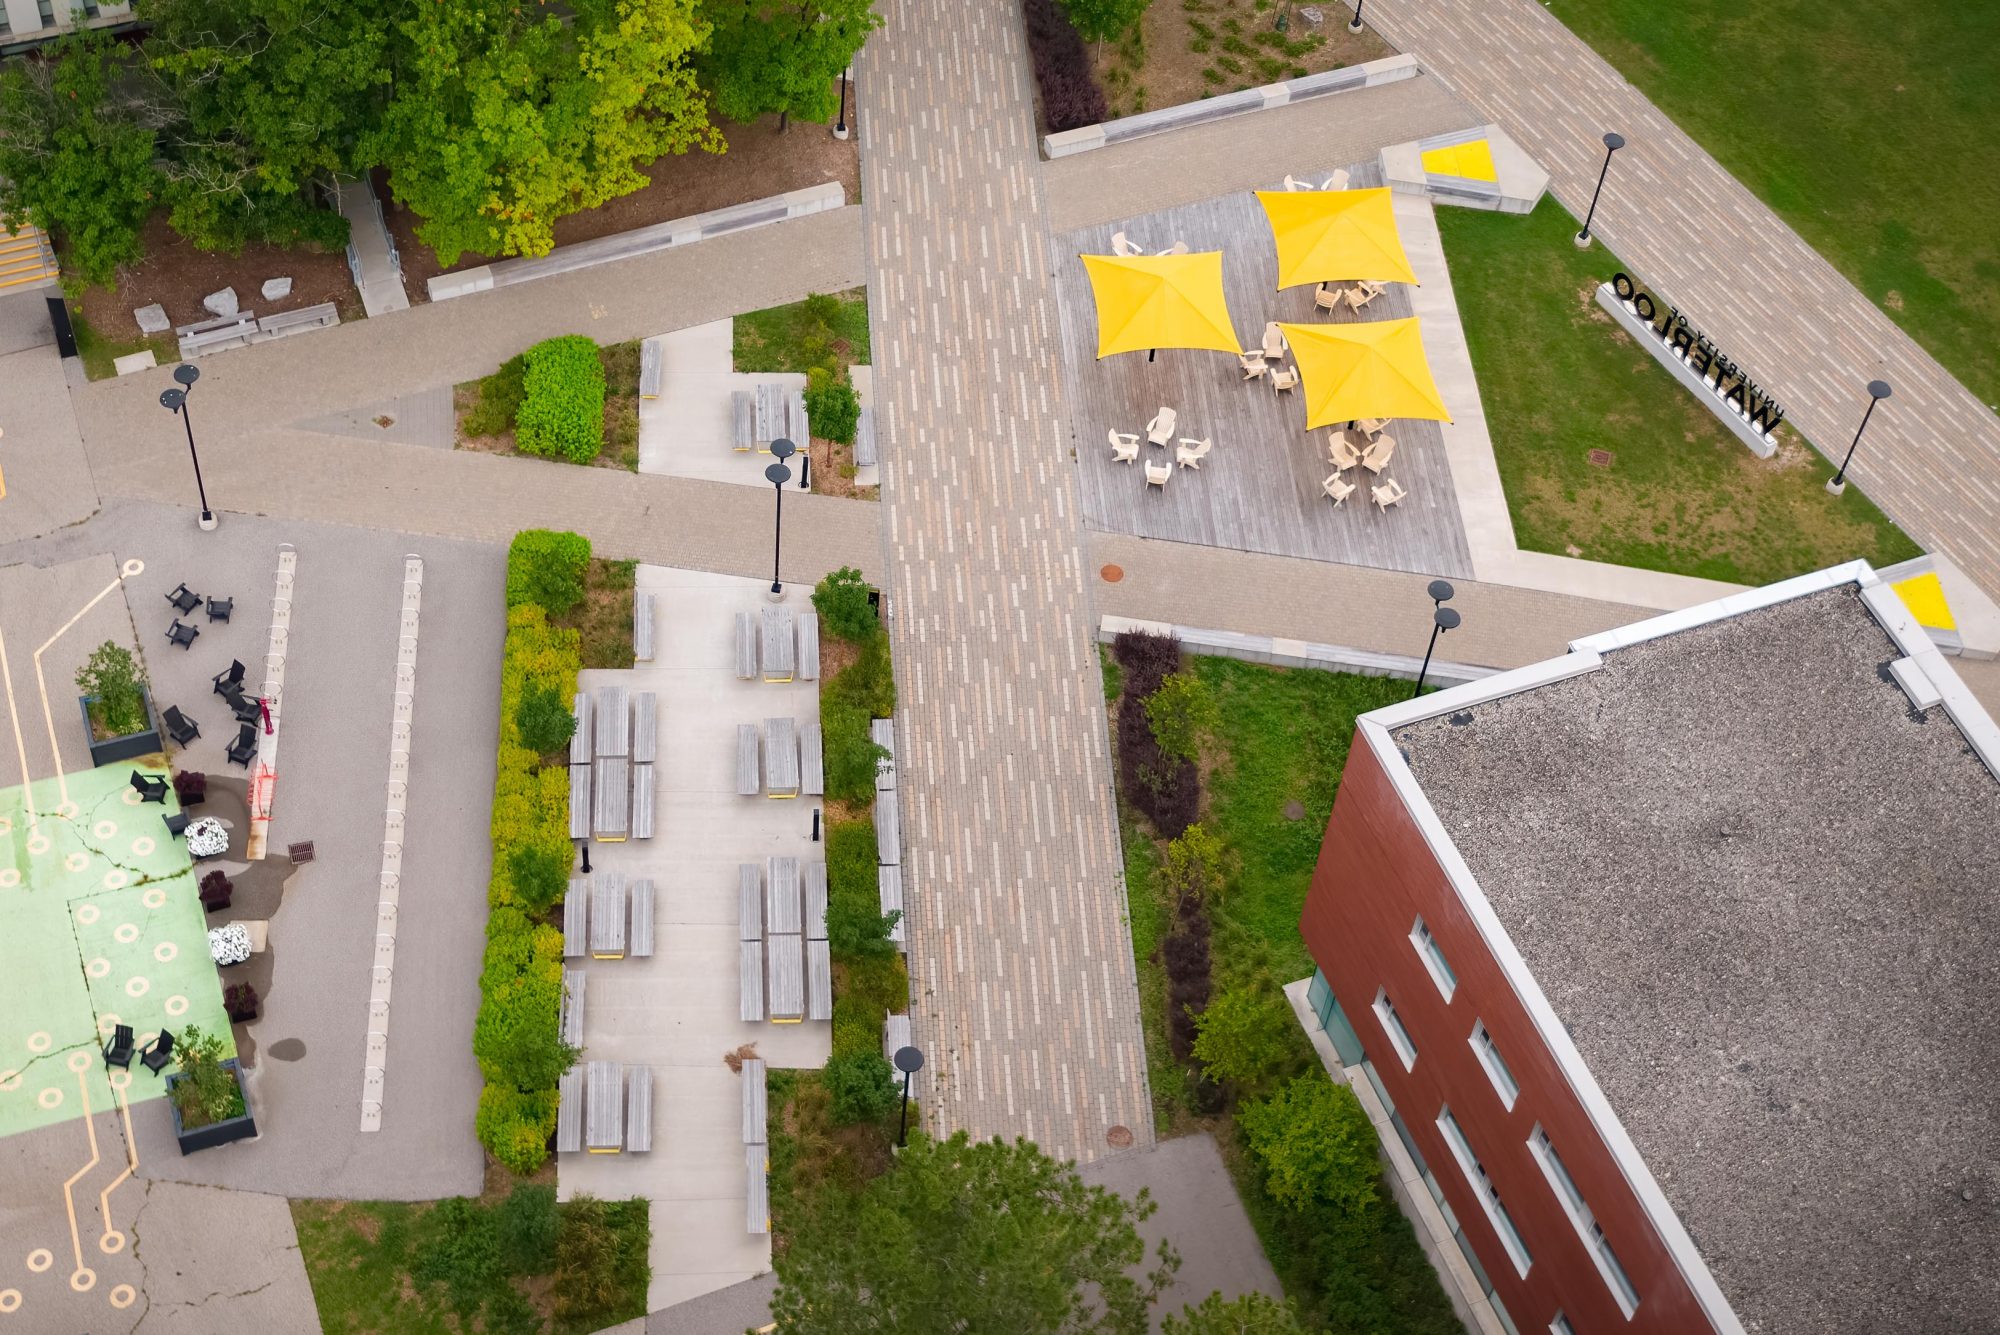 Aerial view of the Quad and South Common areas at the University of Waterloo, with three yellow shade umbrellas, Muskoka chairs and wood picnic tables.